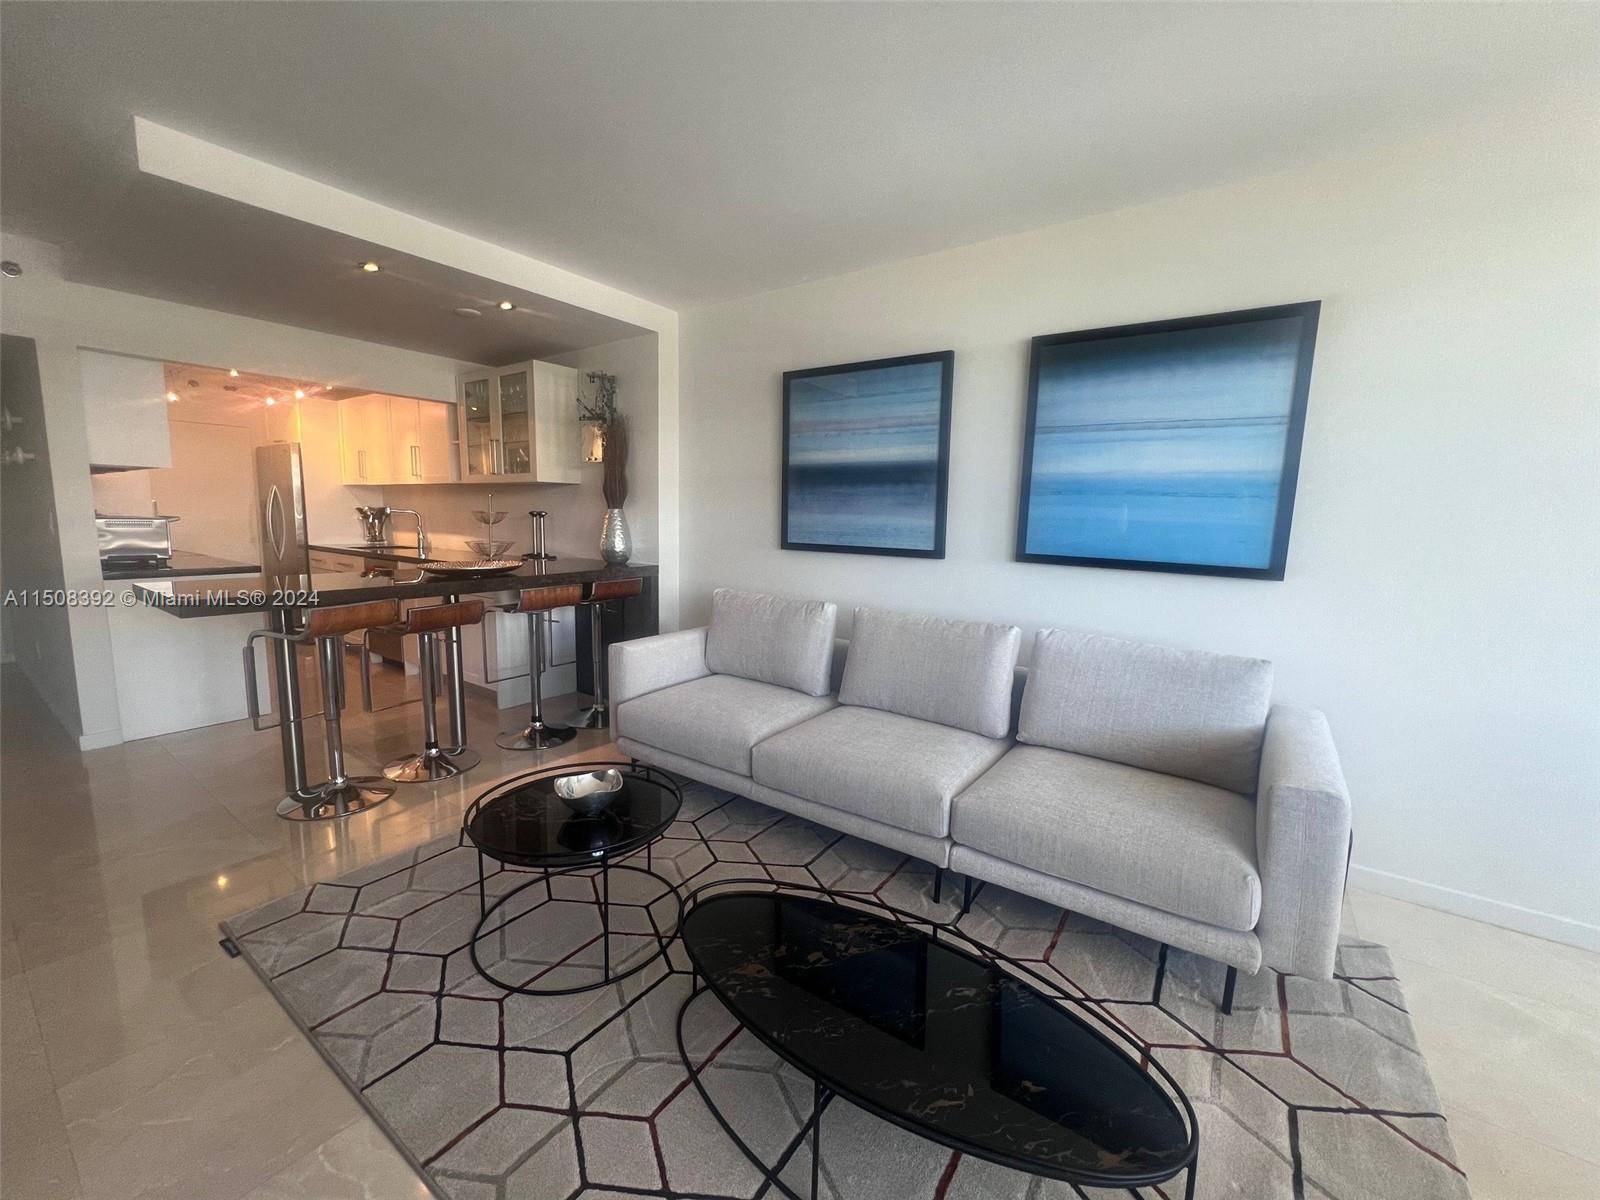 Stunning 1 bed 1bath apartment with balcony and lateral ocean view !